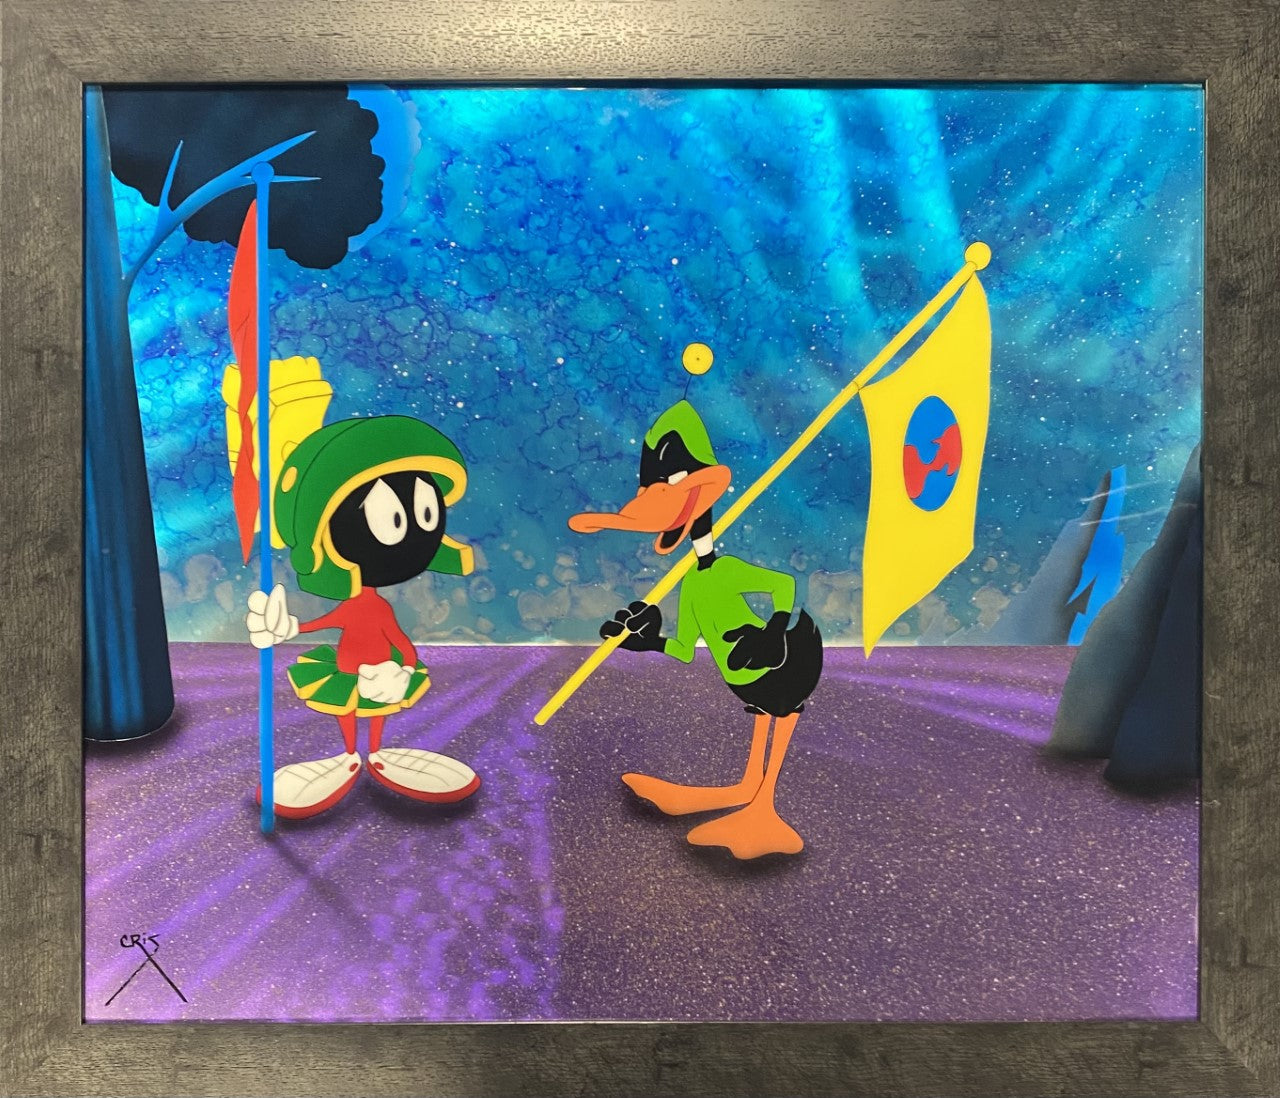 Duck and Martian by Cris Woloszak inspired by Looney Tunes